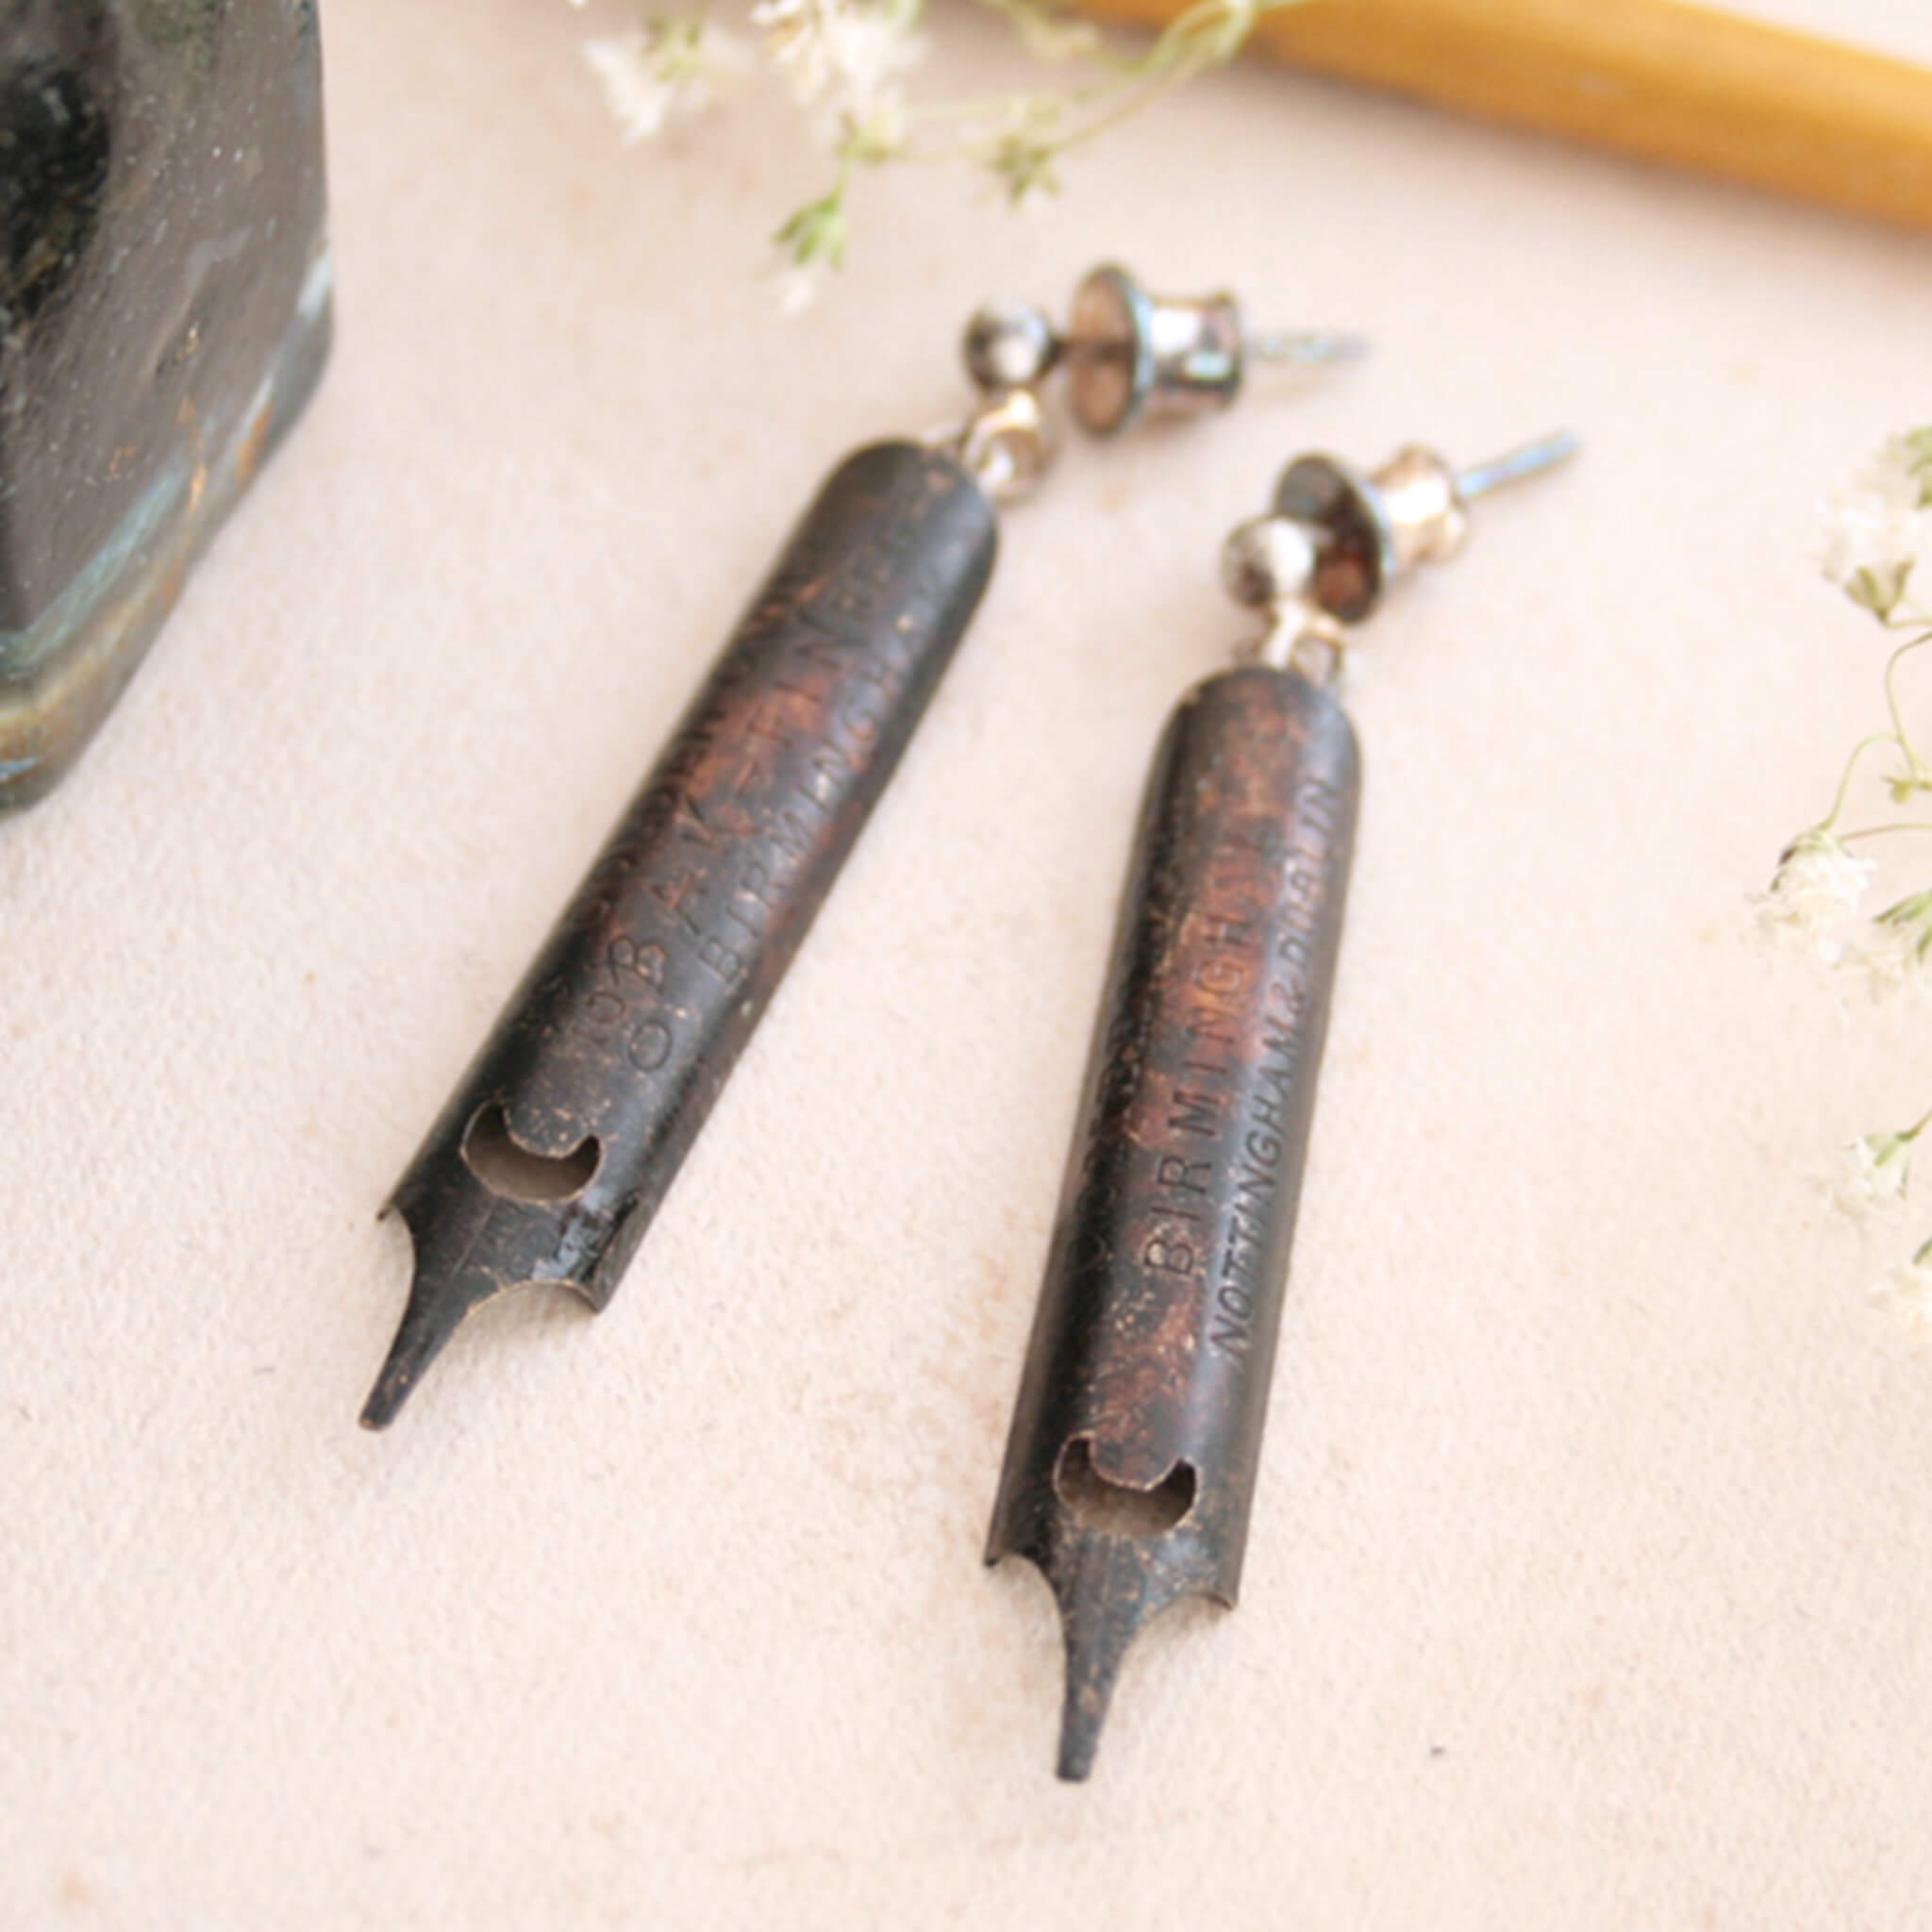 antique gold pen nib earrings covered in heavy patina lying on a coloured card